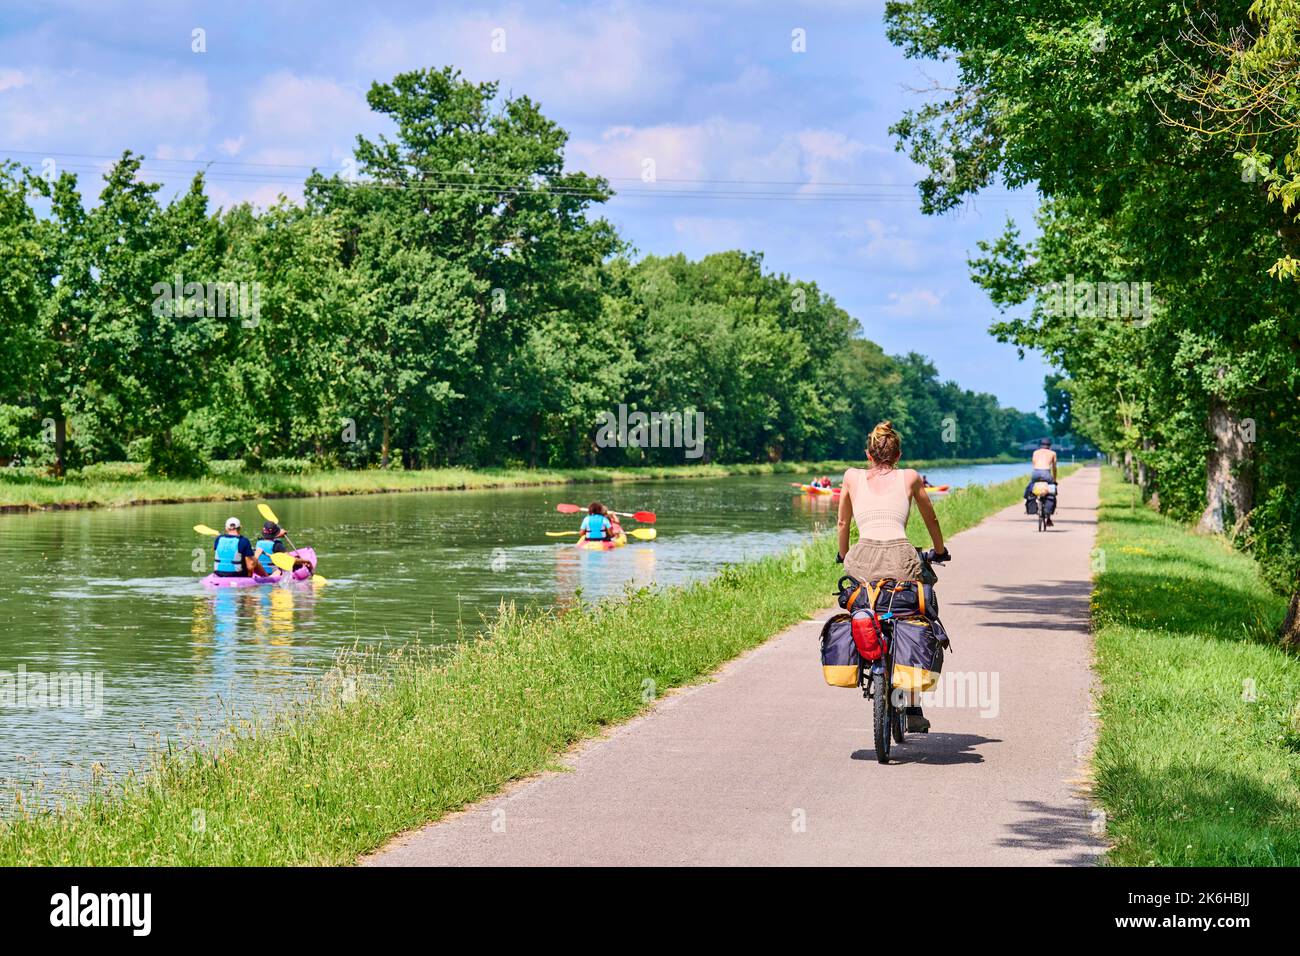 Canoe trip on the Canal lateral a la Garonne and the Canal de Montech linking Montauban and Montech, at the Montech water slope. Cyclists on a towpath Stock Photo